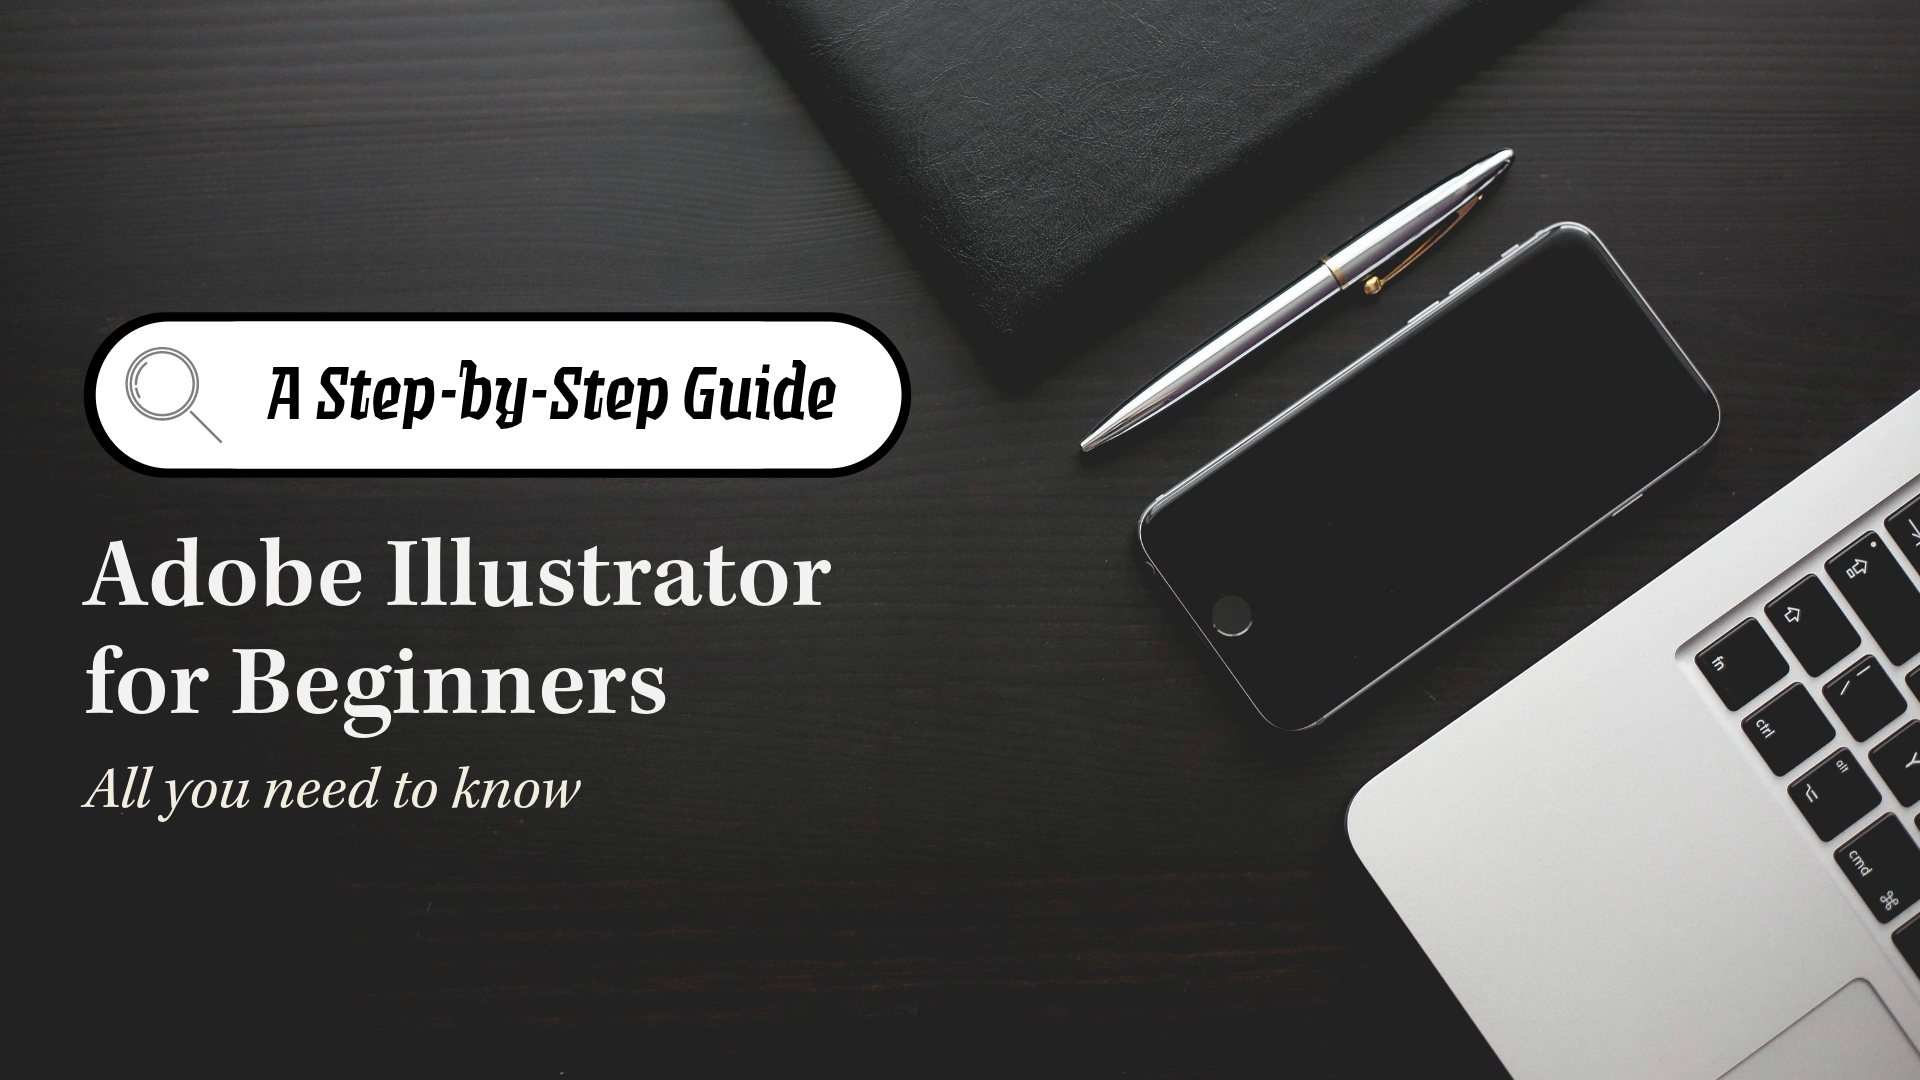 Adobe Illustrator for Beginners: A Step-by-Step Guide.